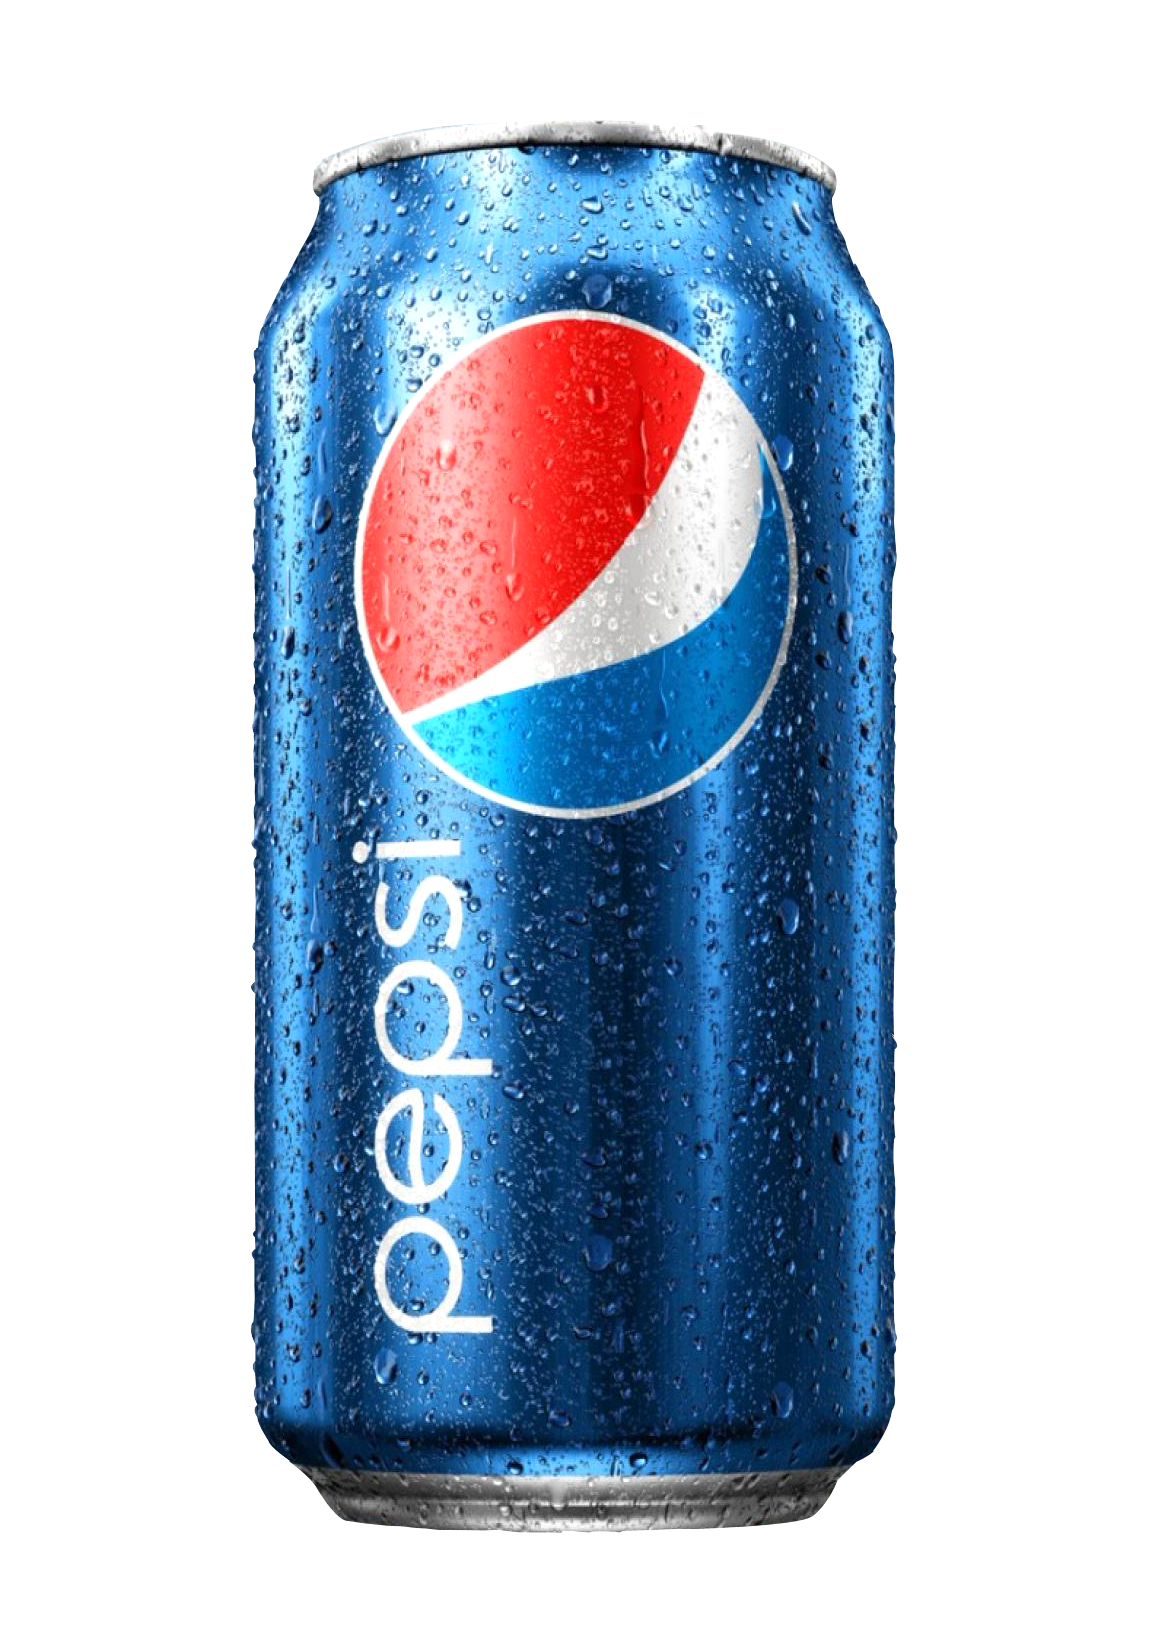 Transparent pictures free icons. Pepsi bottle png